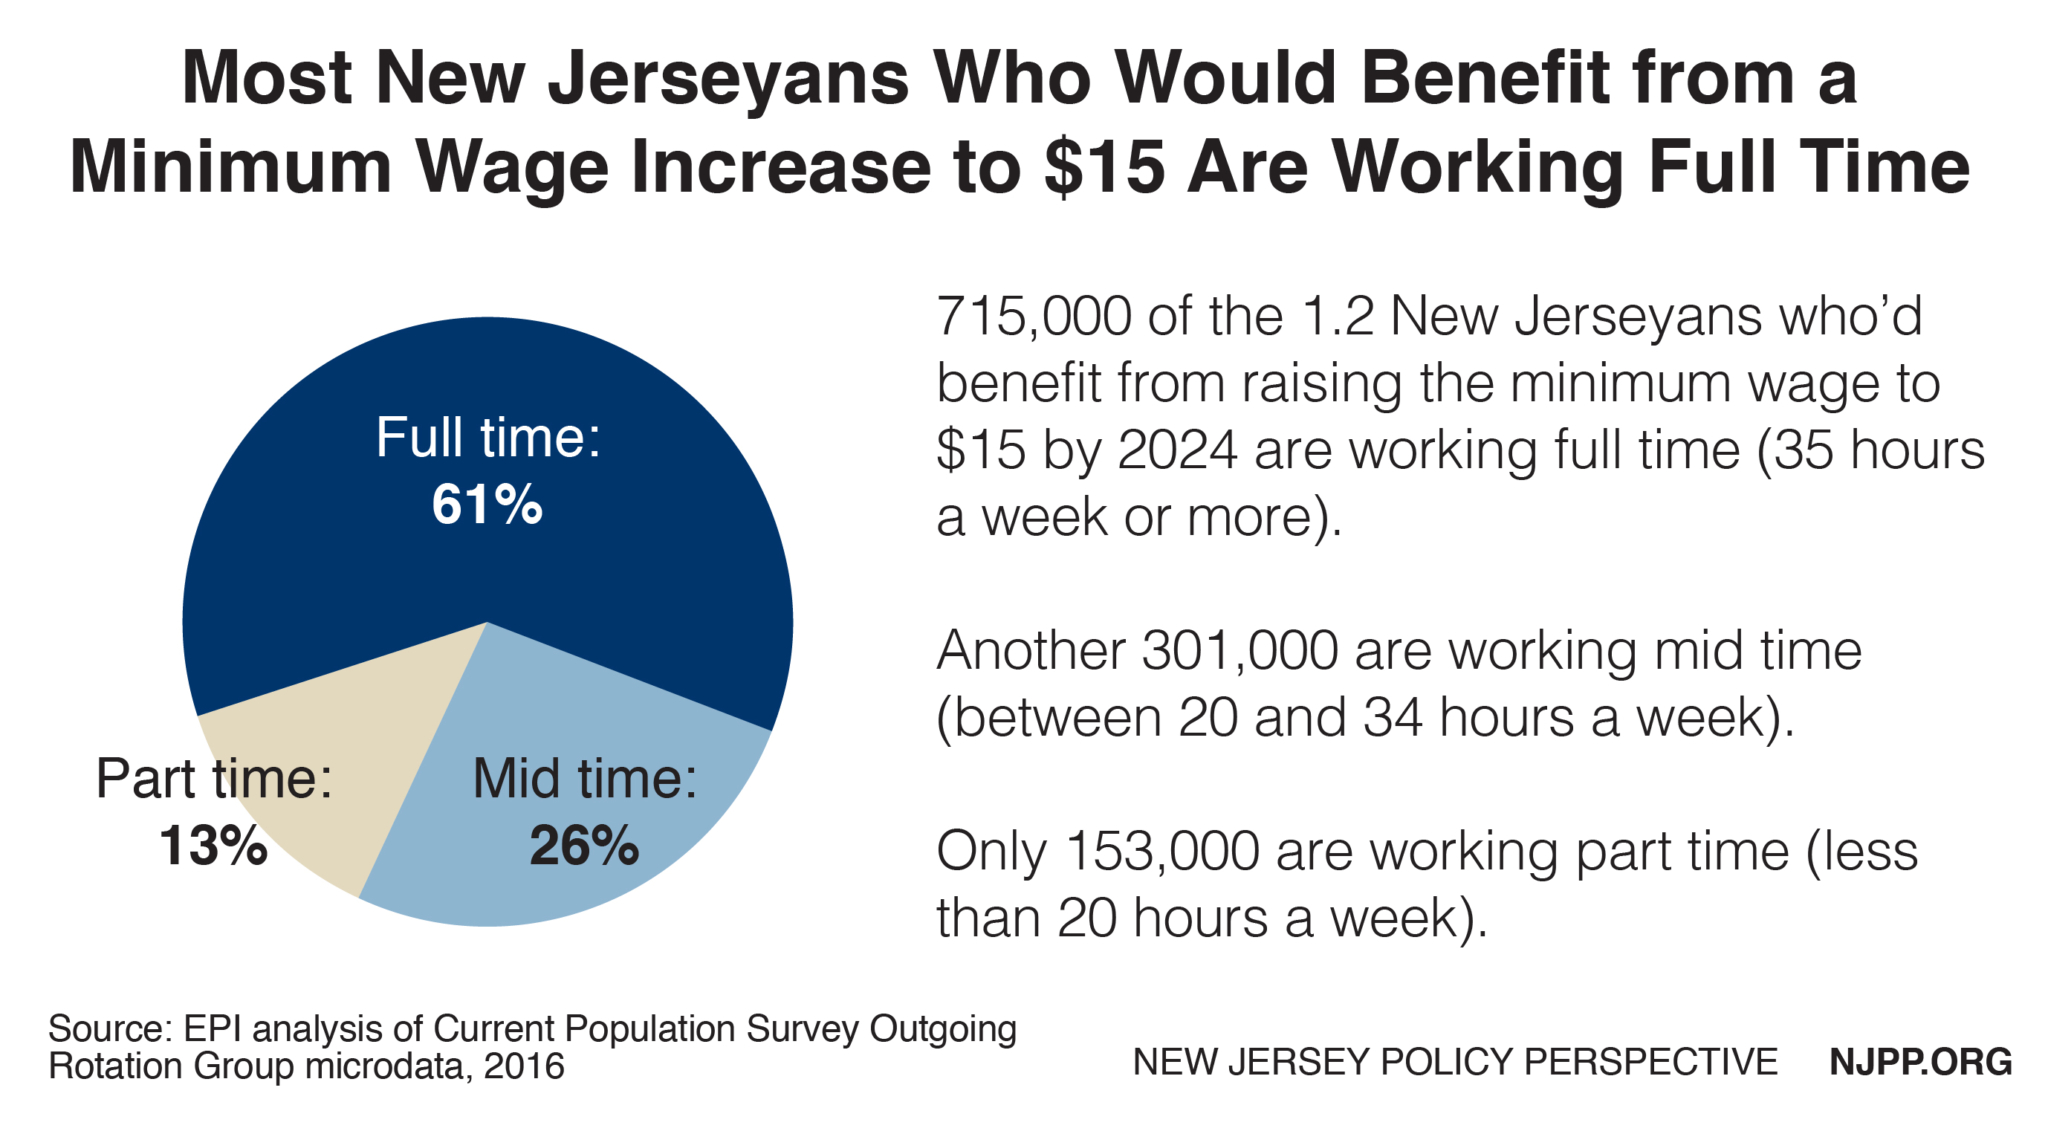 raising-the-minimum-wage-to-15-by-2024-would-boost-the-pay-of-1-2-million-new-jerseyans-new